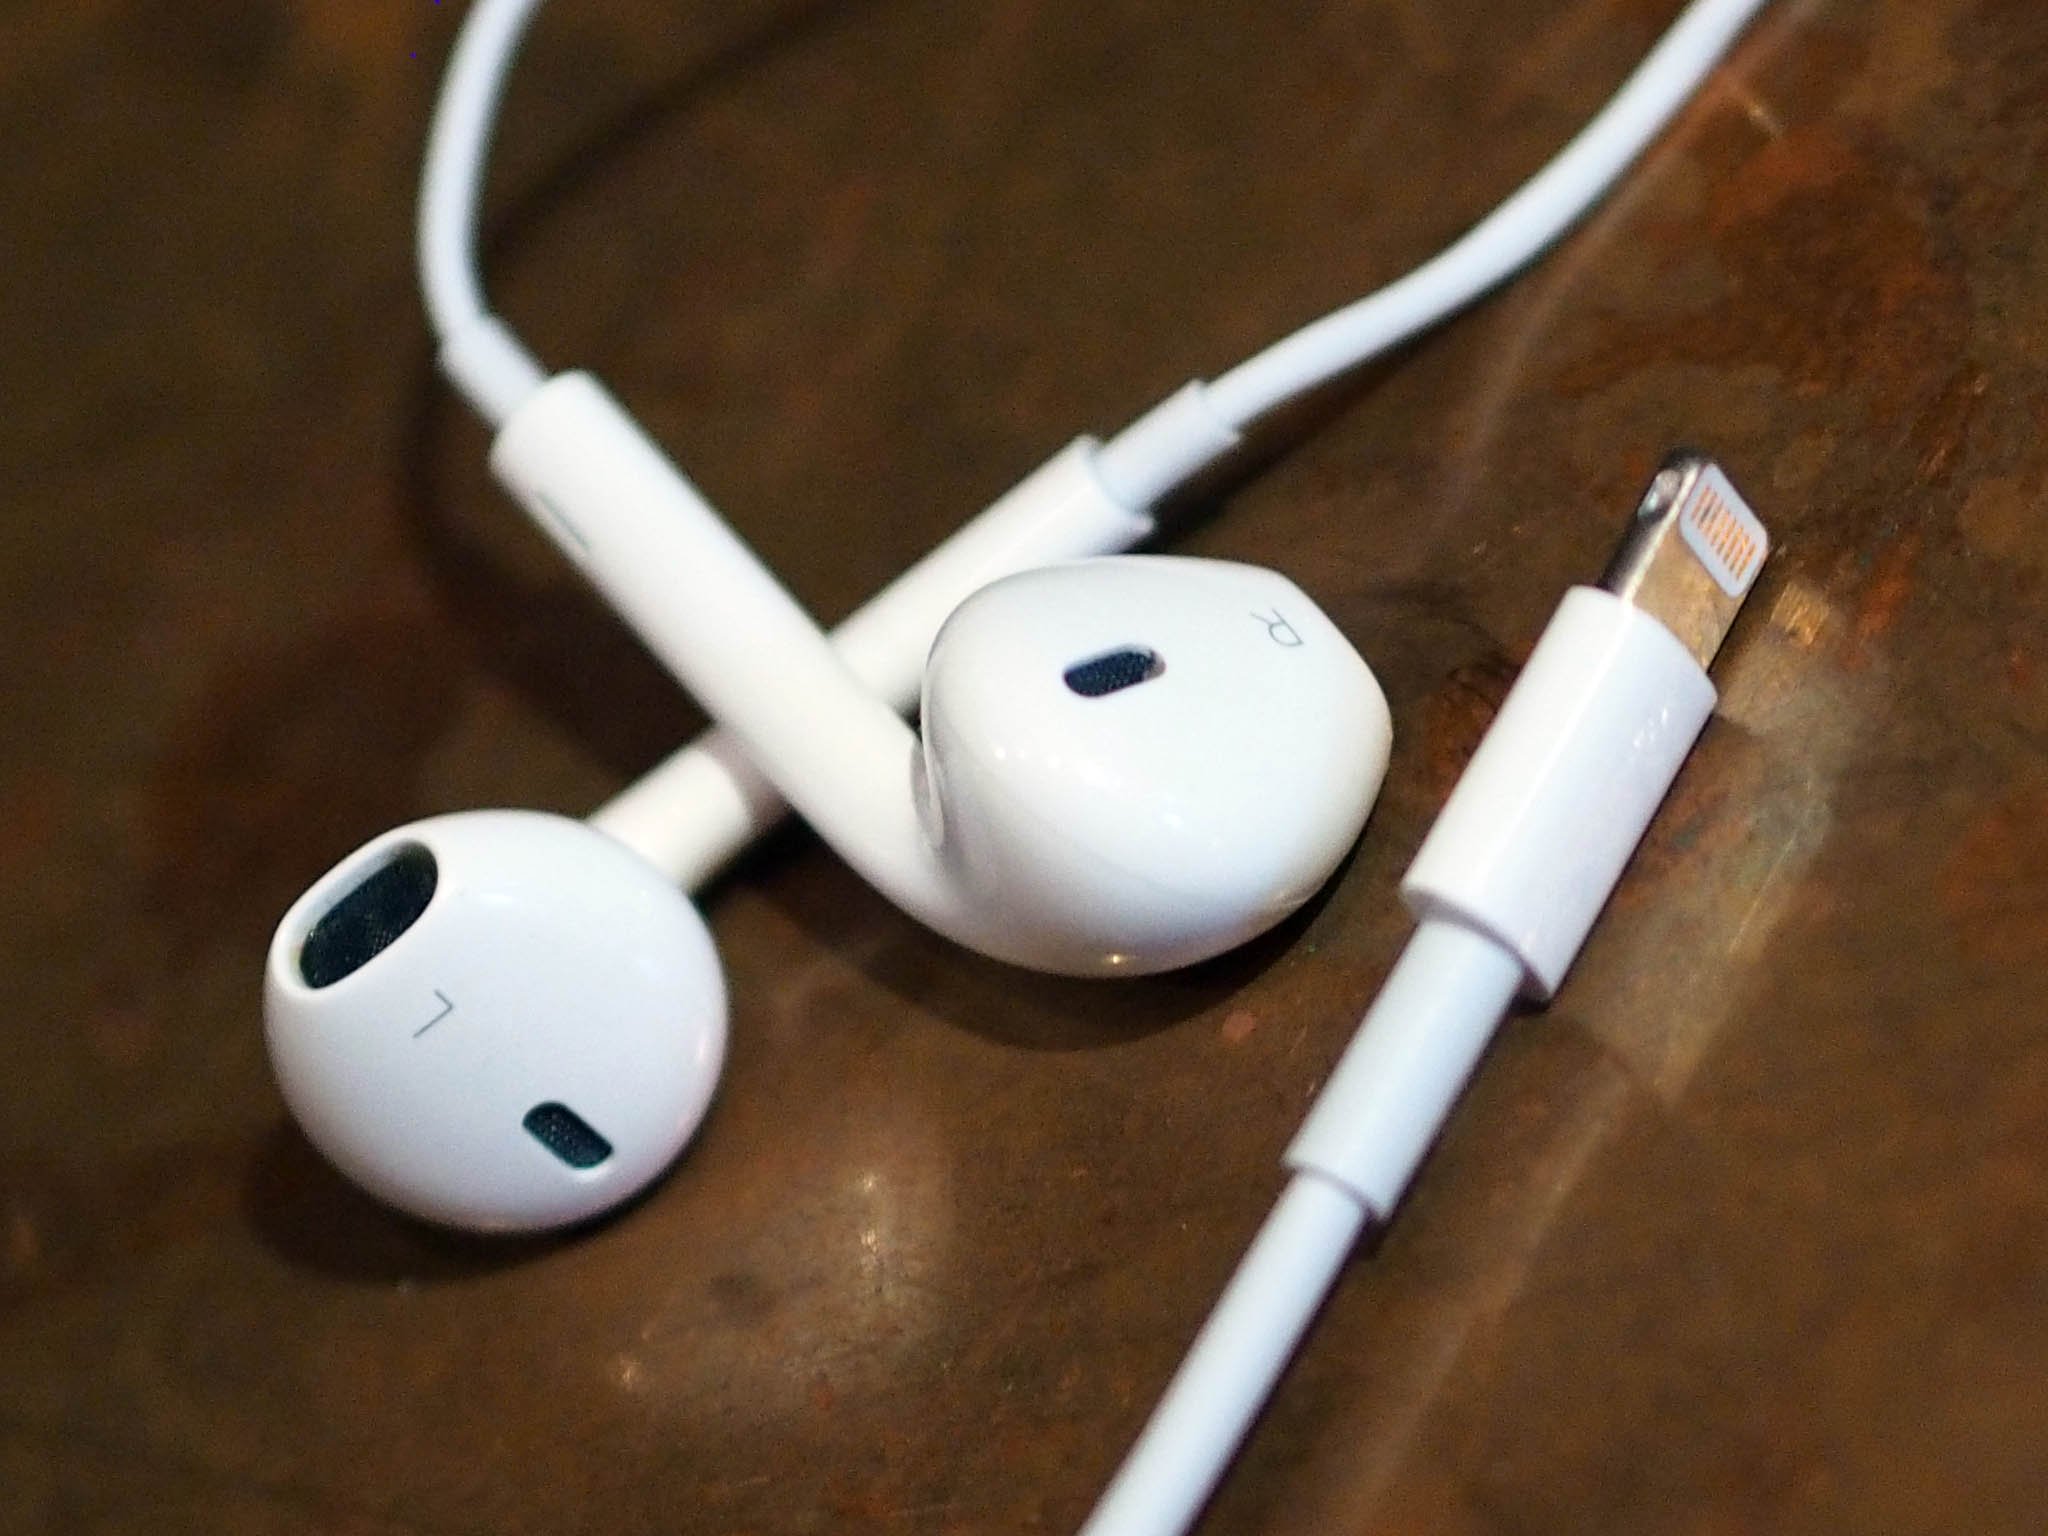 Apple EarPods with a Lightning cable